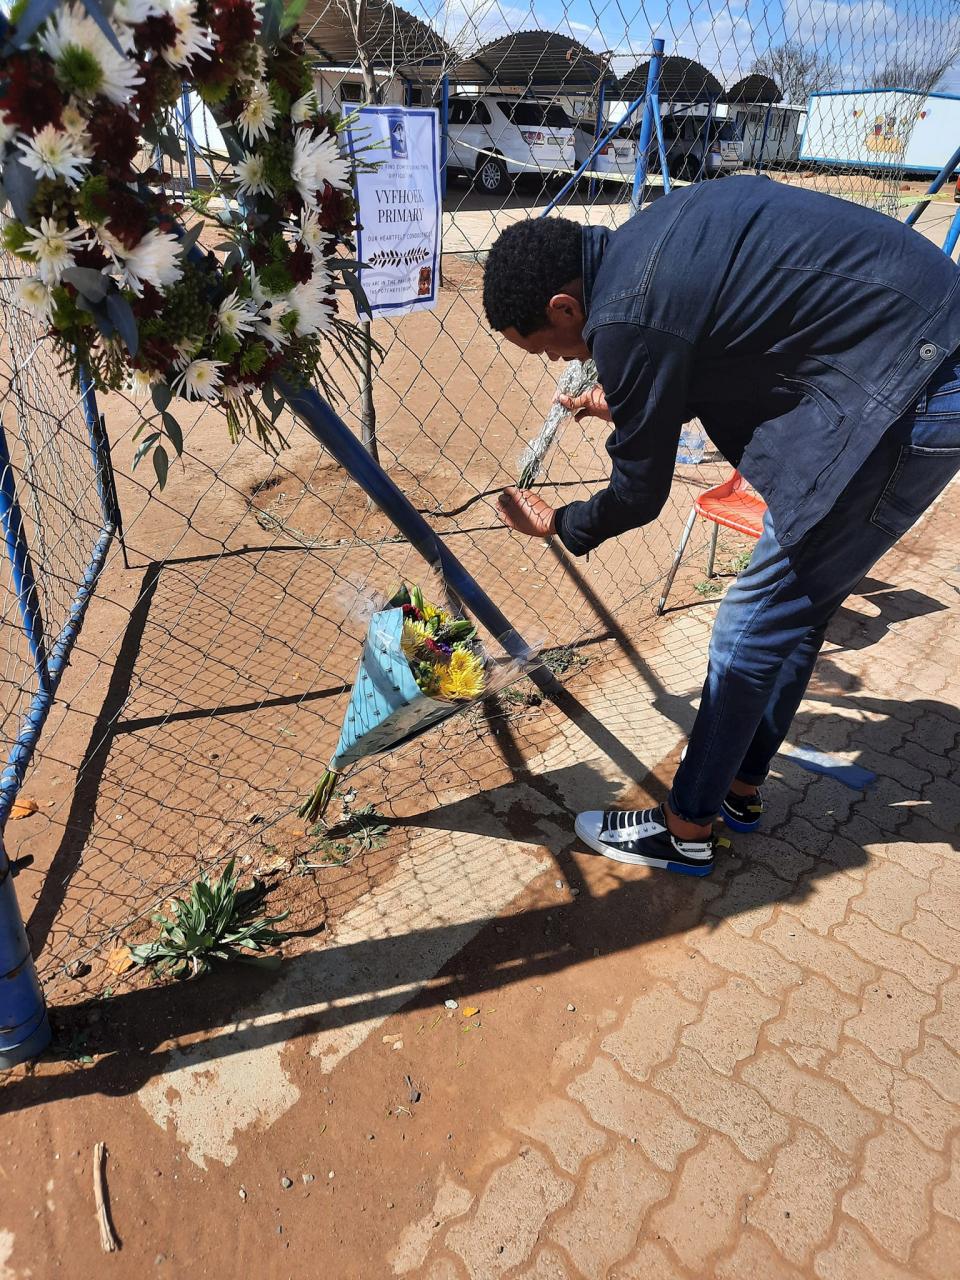 Five pupils killed as truck ploughs into school in South Africa 